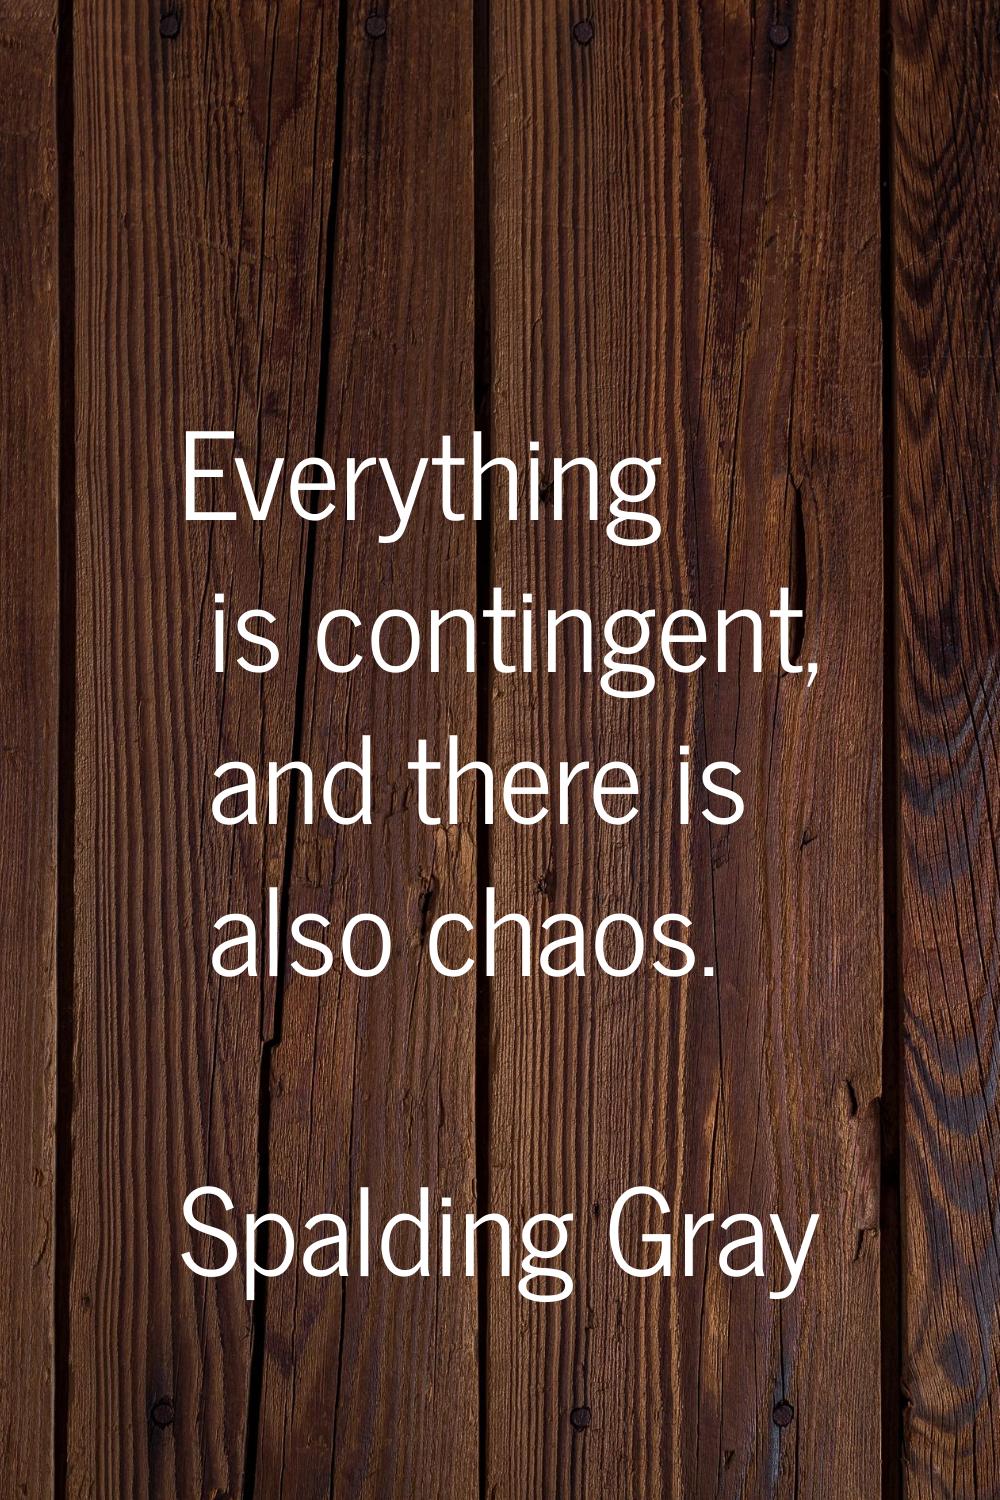 Everything is contingent, and there is also chaos.